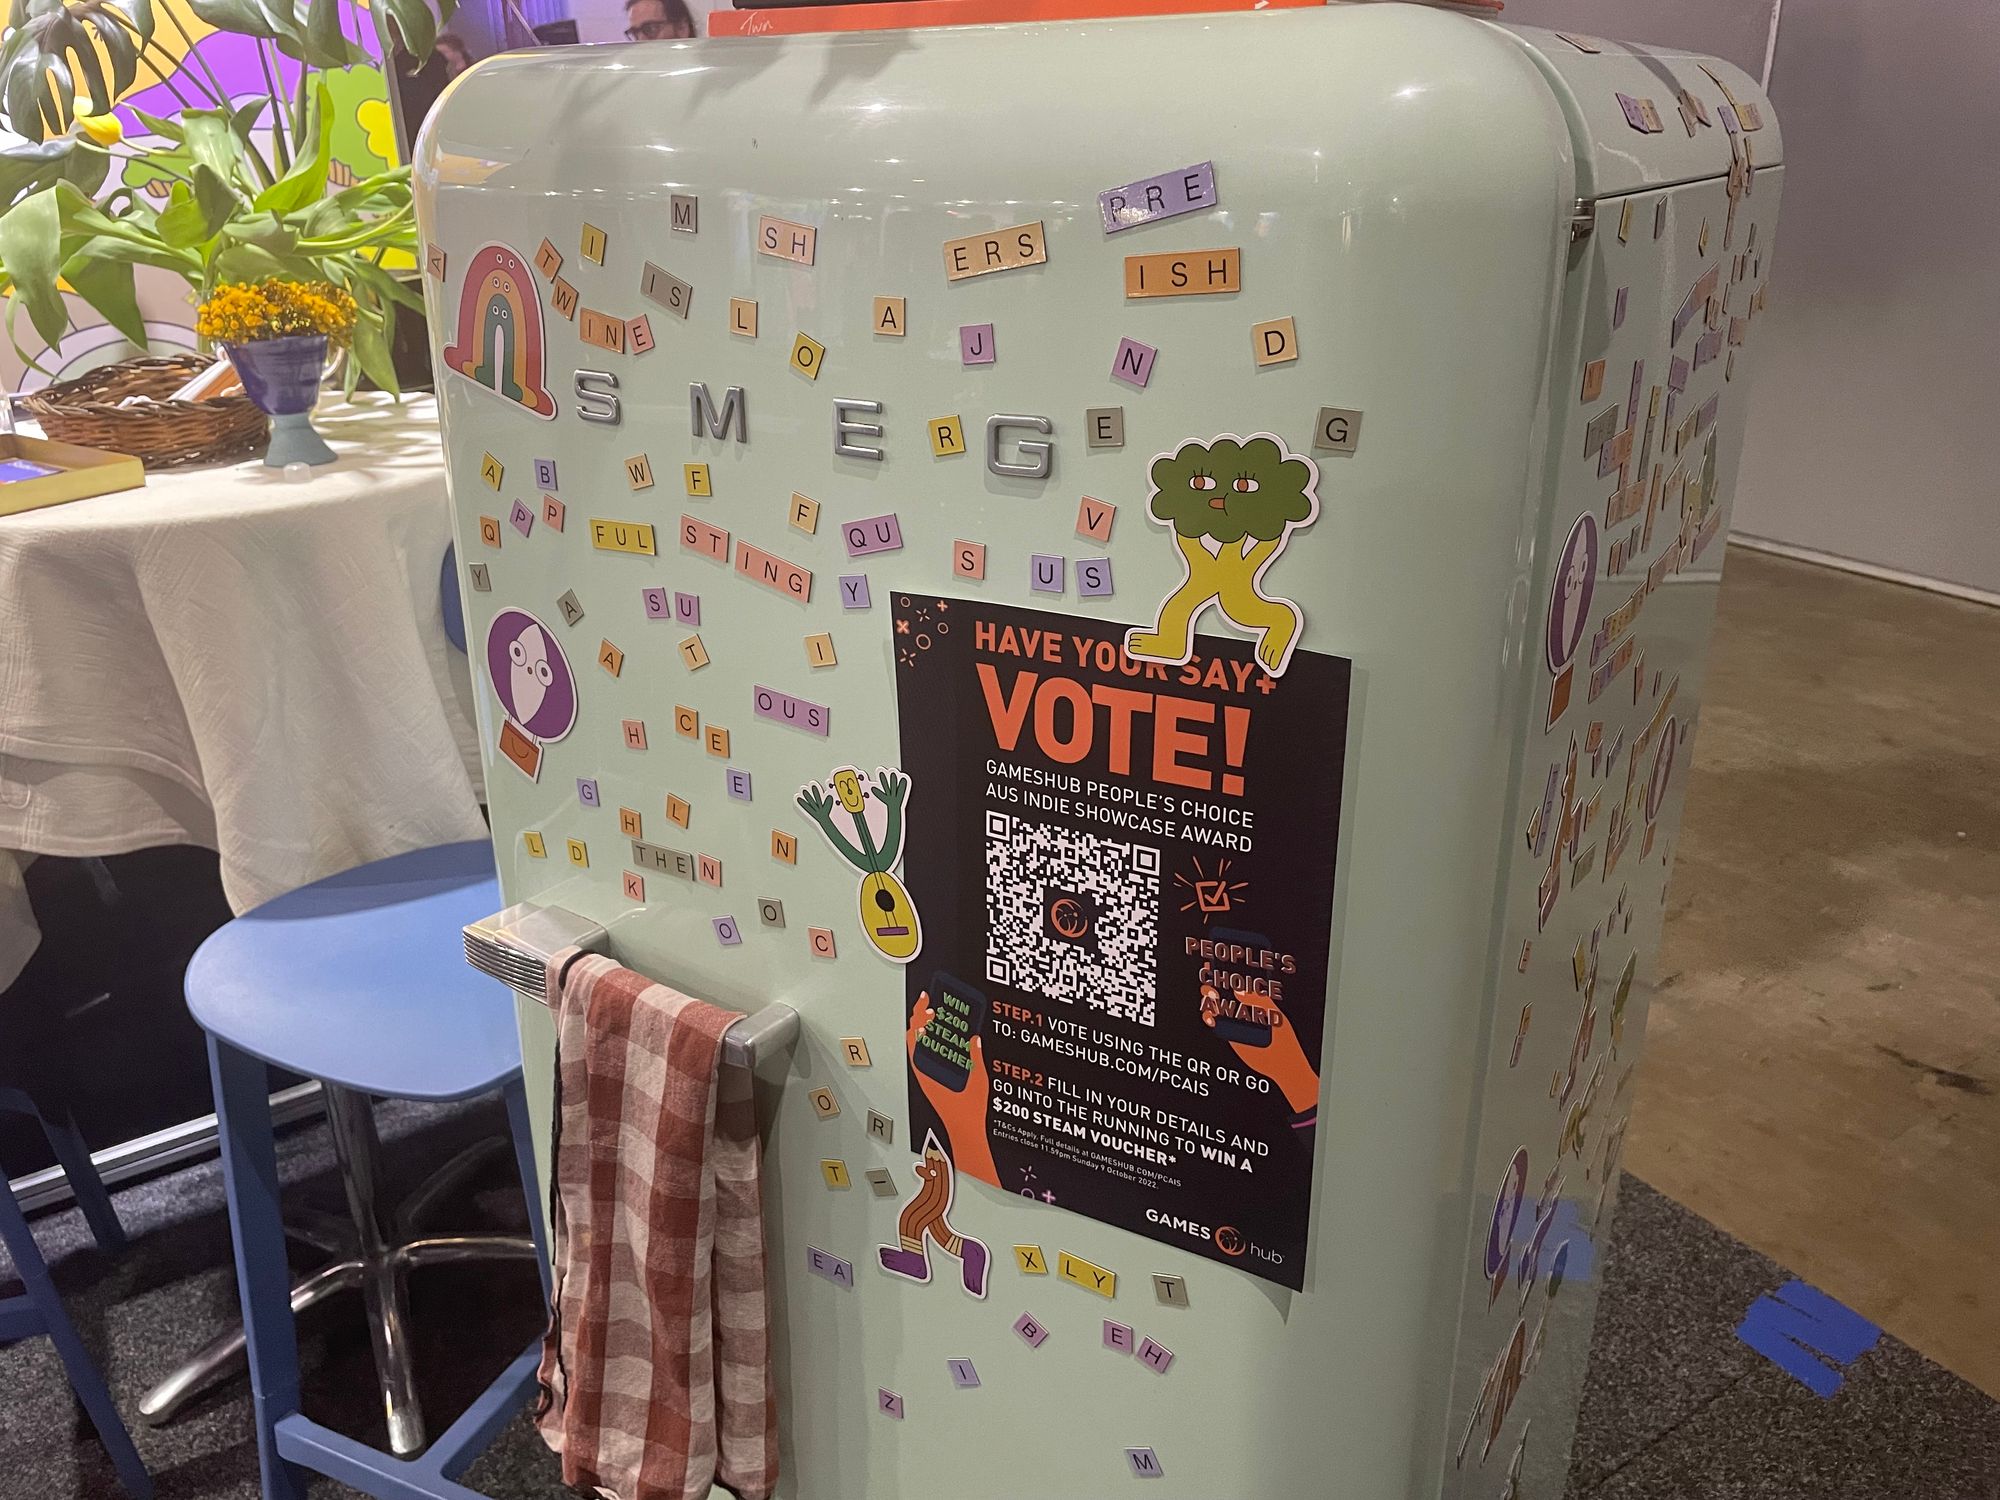 A pastel green retro fridge covered in Gubbins magnets at the game's booth during PAX Australia 2022.